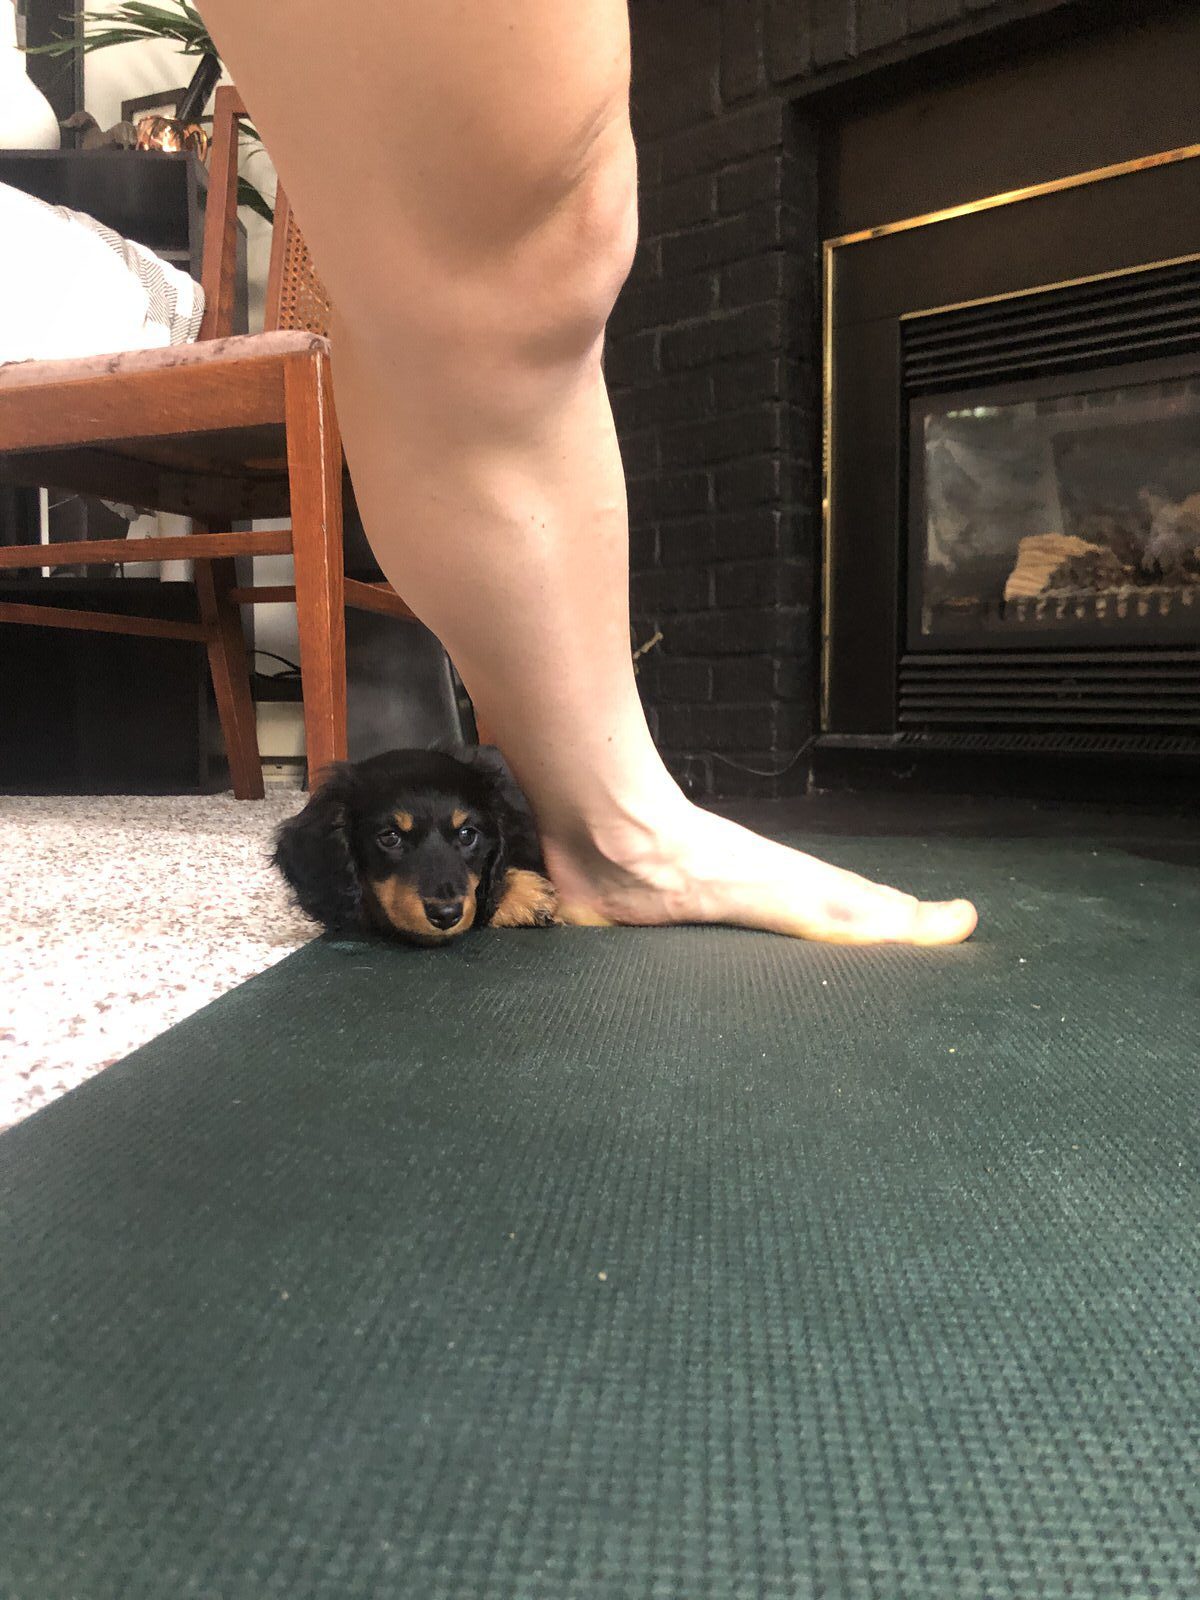 A small black and brown puppy lies on a dark mat, peeking out from underneath it. In the foreground, a person's bare foot and lower leg are visible, standing on the mat. A fireplace and furniture are seen in the background.